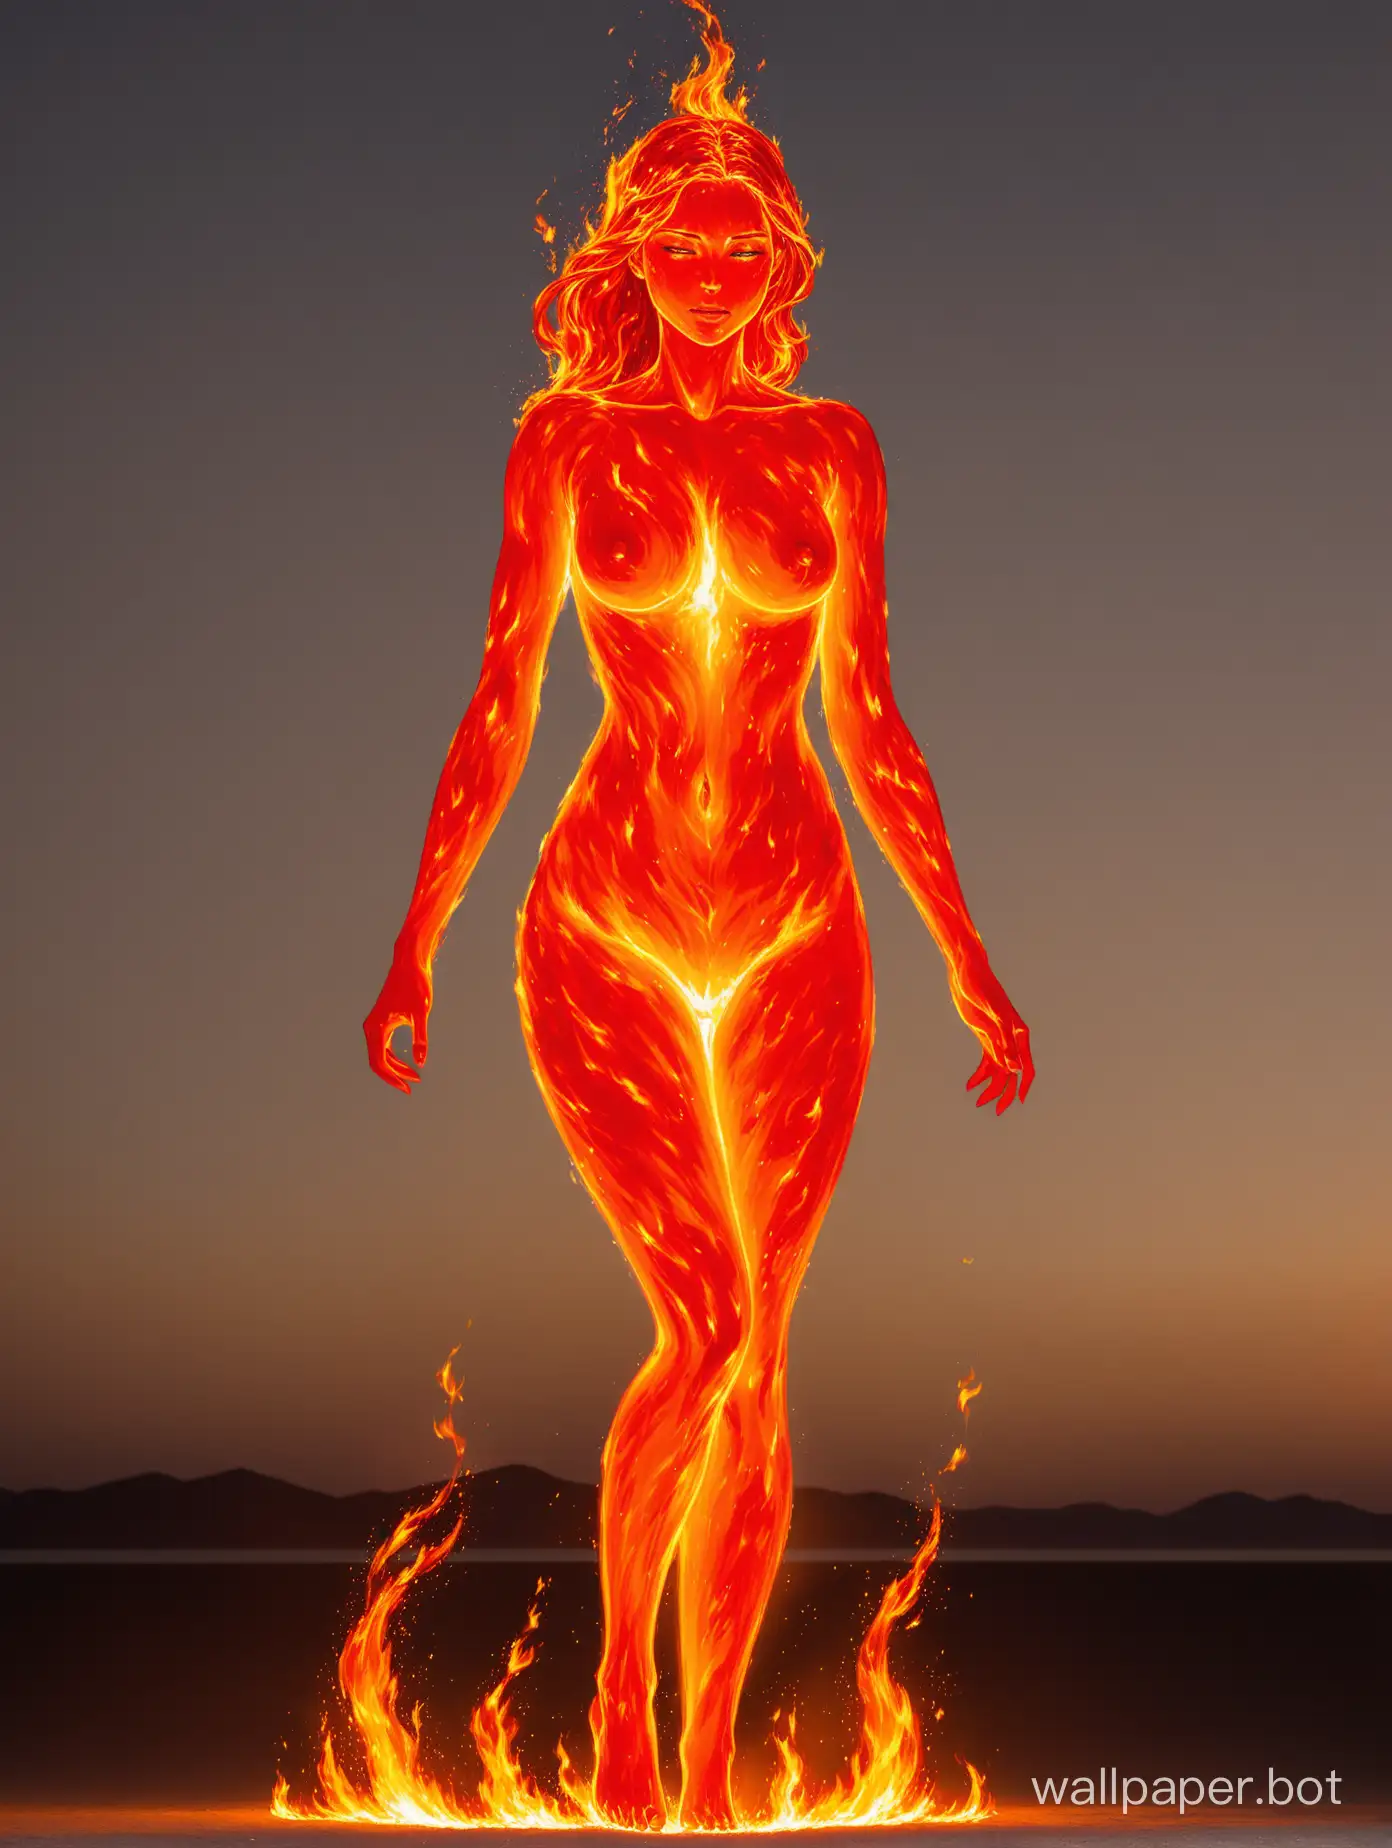 A naked woman made entirely of fire